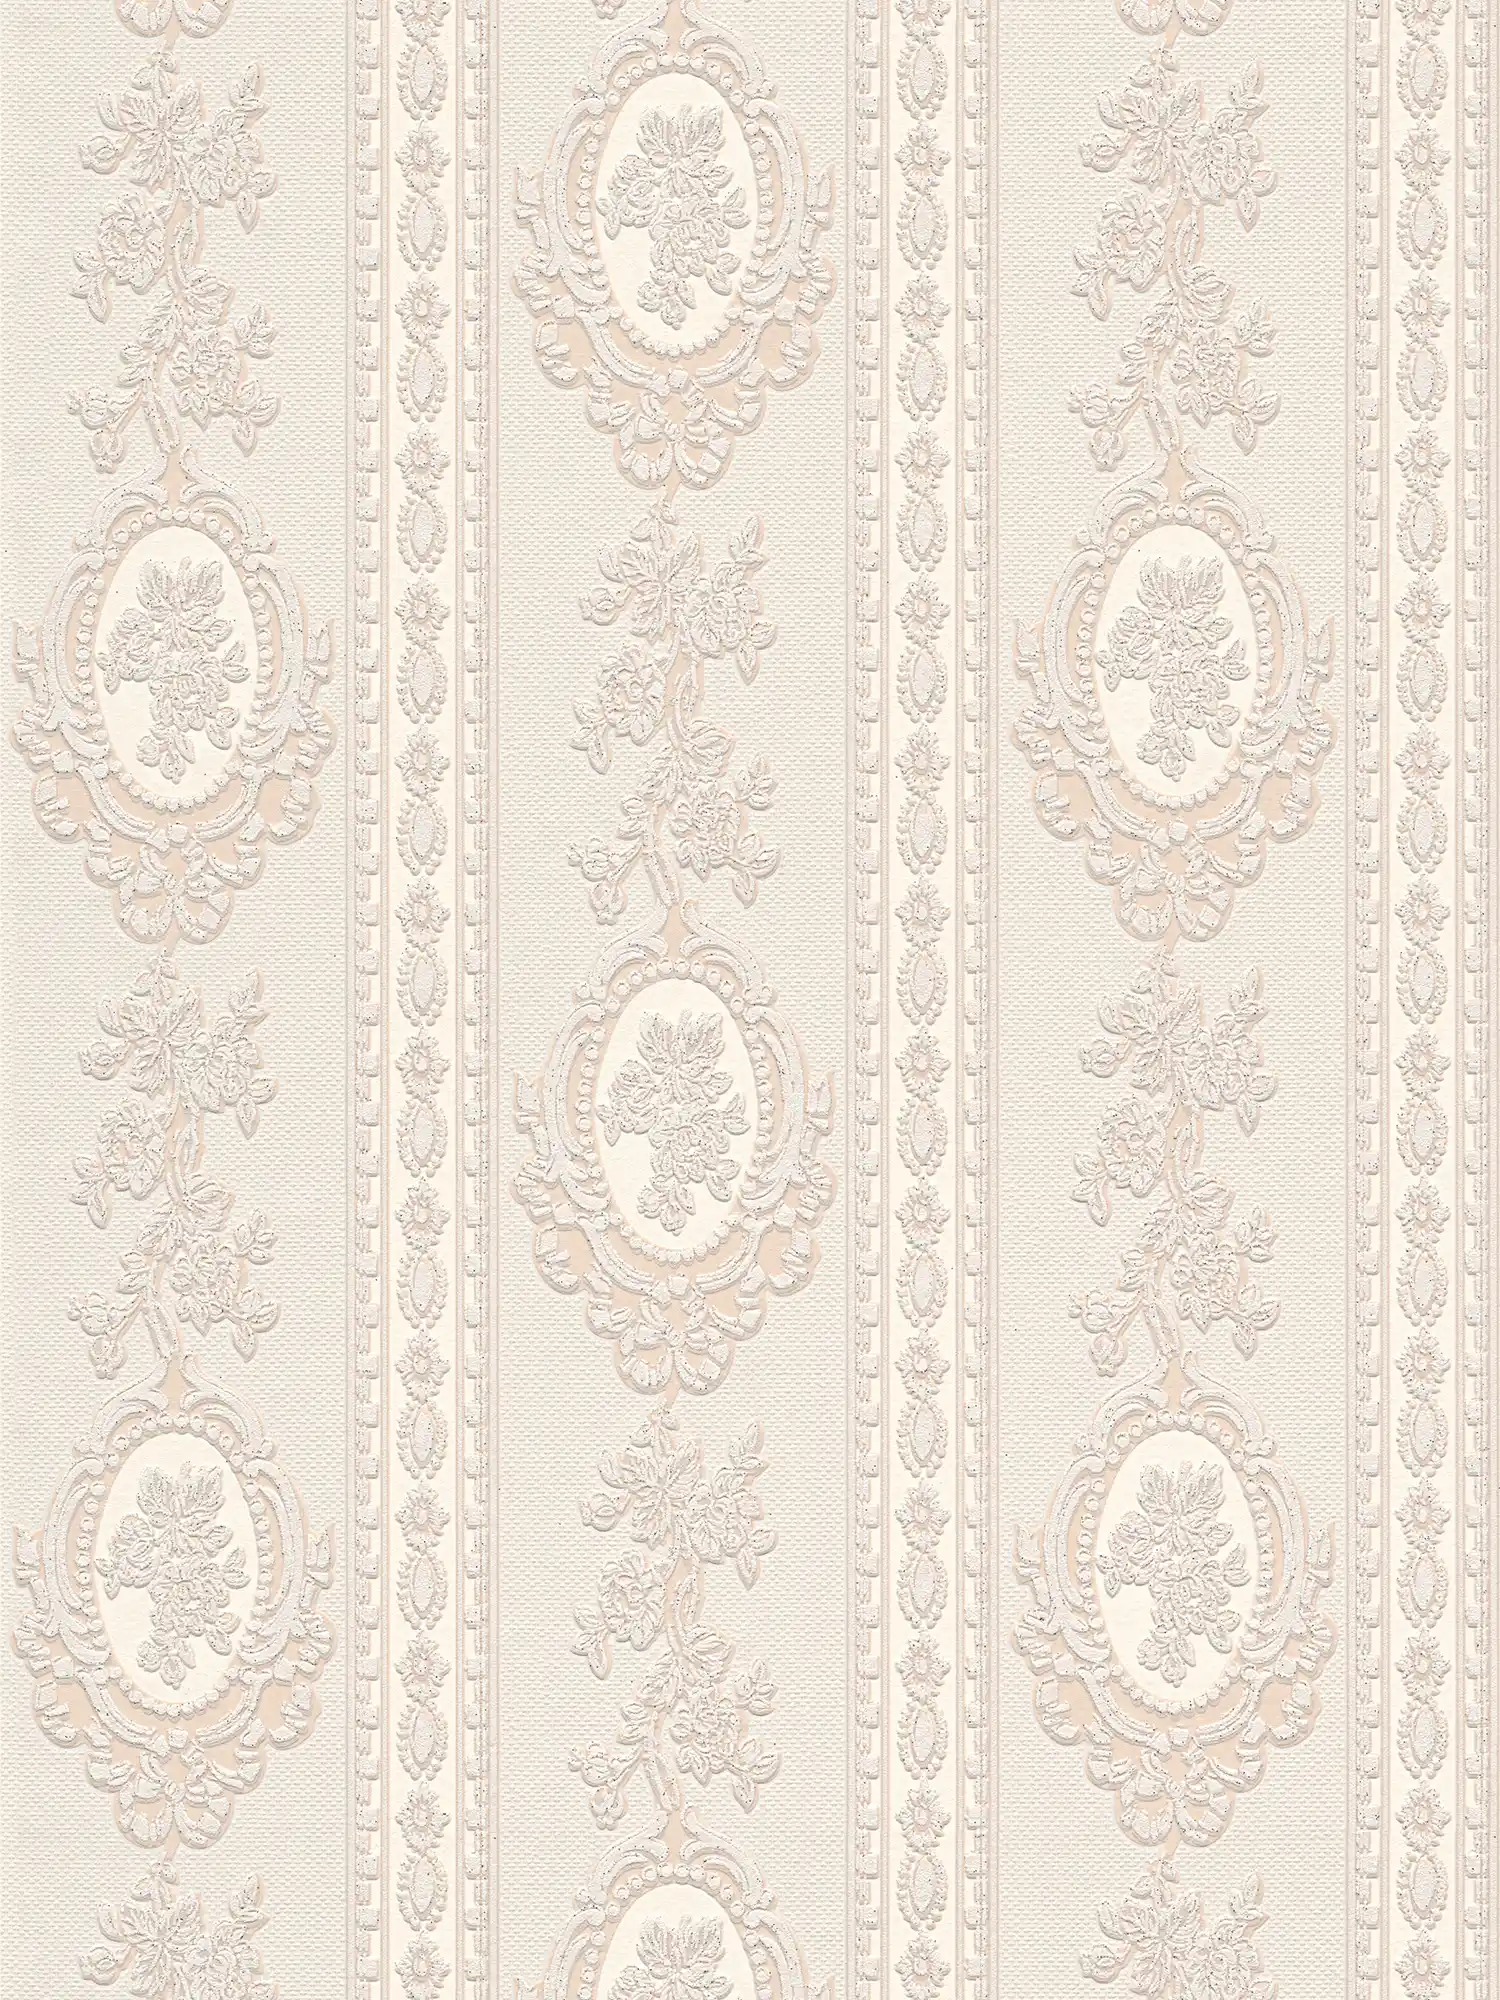 Ornamental wallpaper floral elements, stripes and flowers - beige, cream, silver
